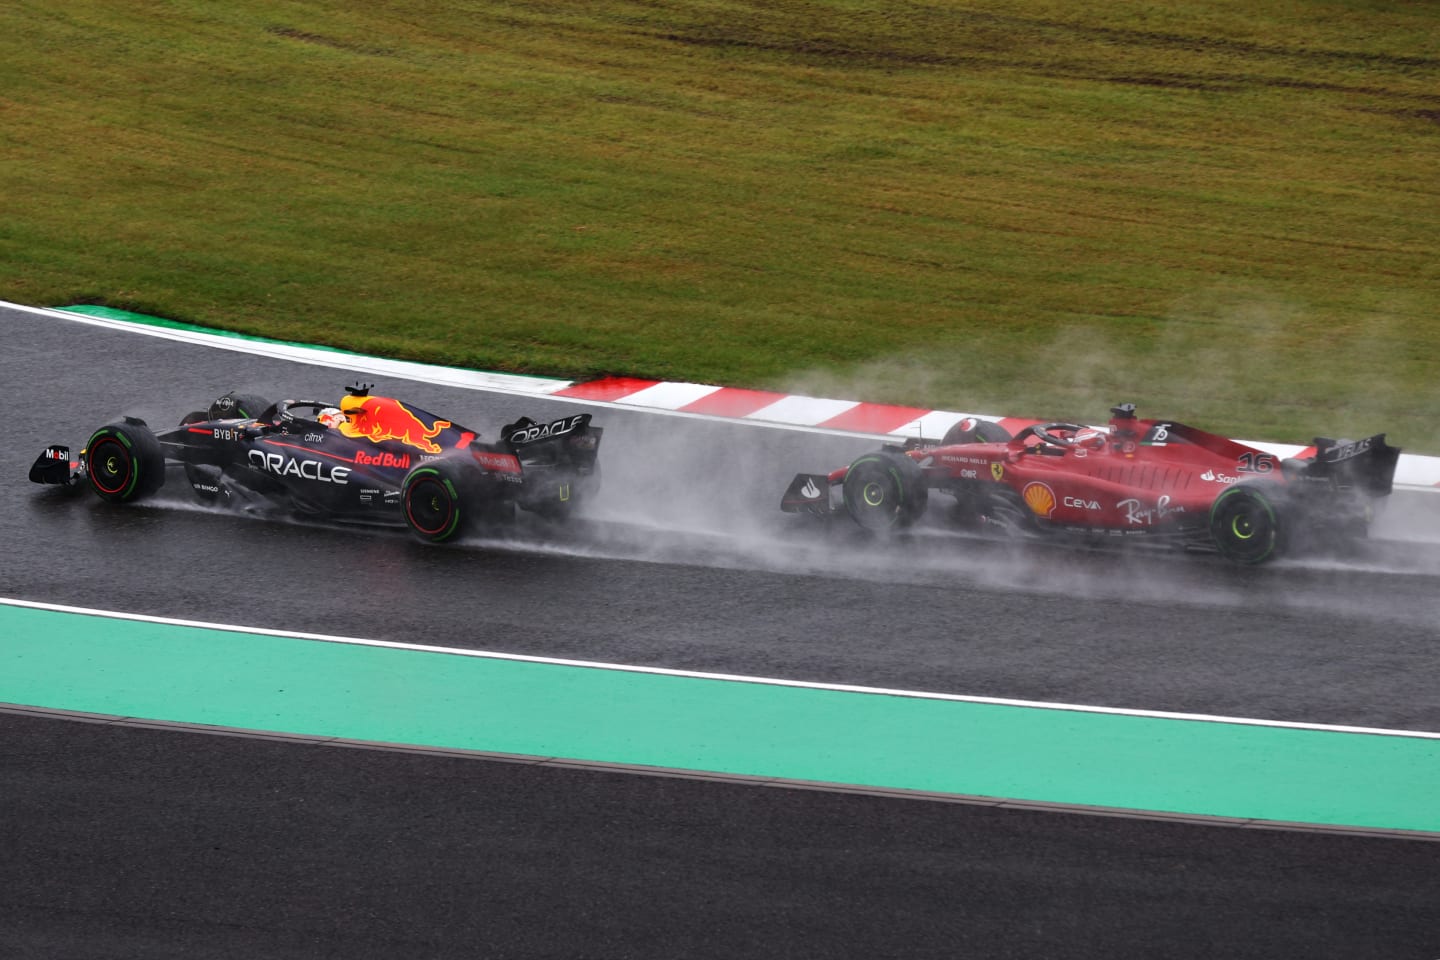 SUZUKA, JAPAN - OCTOBER 09: Max Verstappen of the Netherlands driving the (1) Oracle Red Bull Racing RB18 leads Charles Leclerc of Monaco driving the (16) Ferrari F1-75 on lap one during the F1 Grand Prix of Japan at Suzuka International Racing Course on October 09, 2022 in Suzuka, Japan. (Photo by Clive Rose/Getty Images)